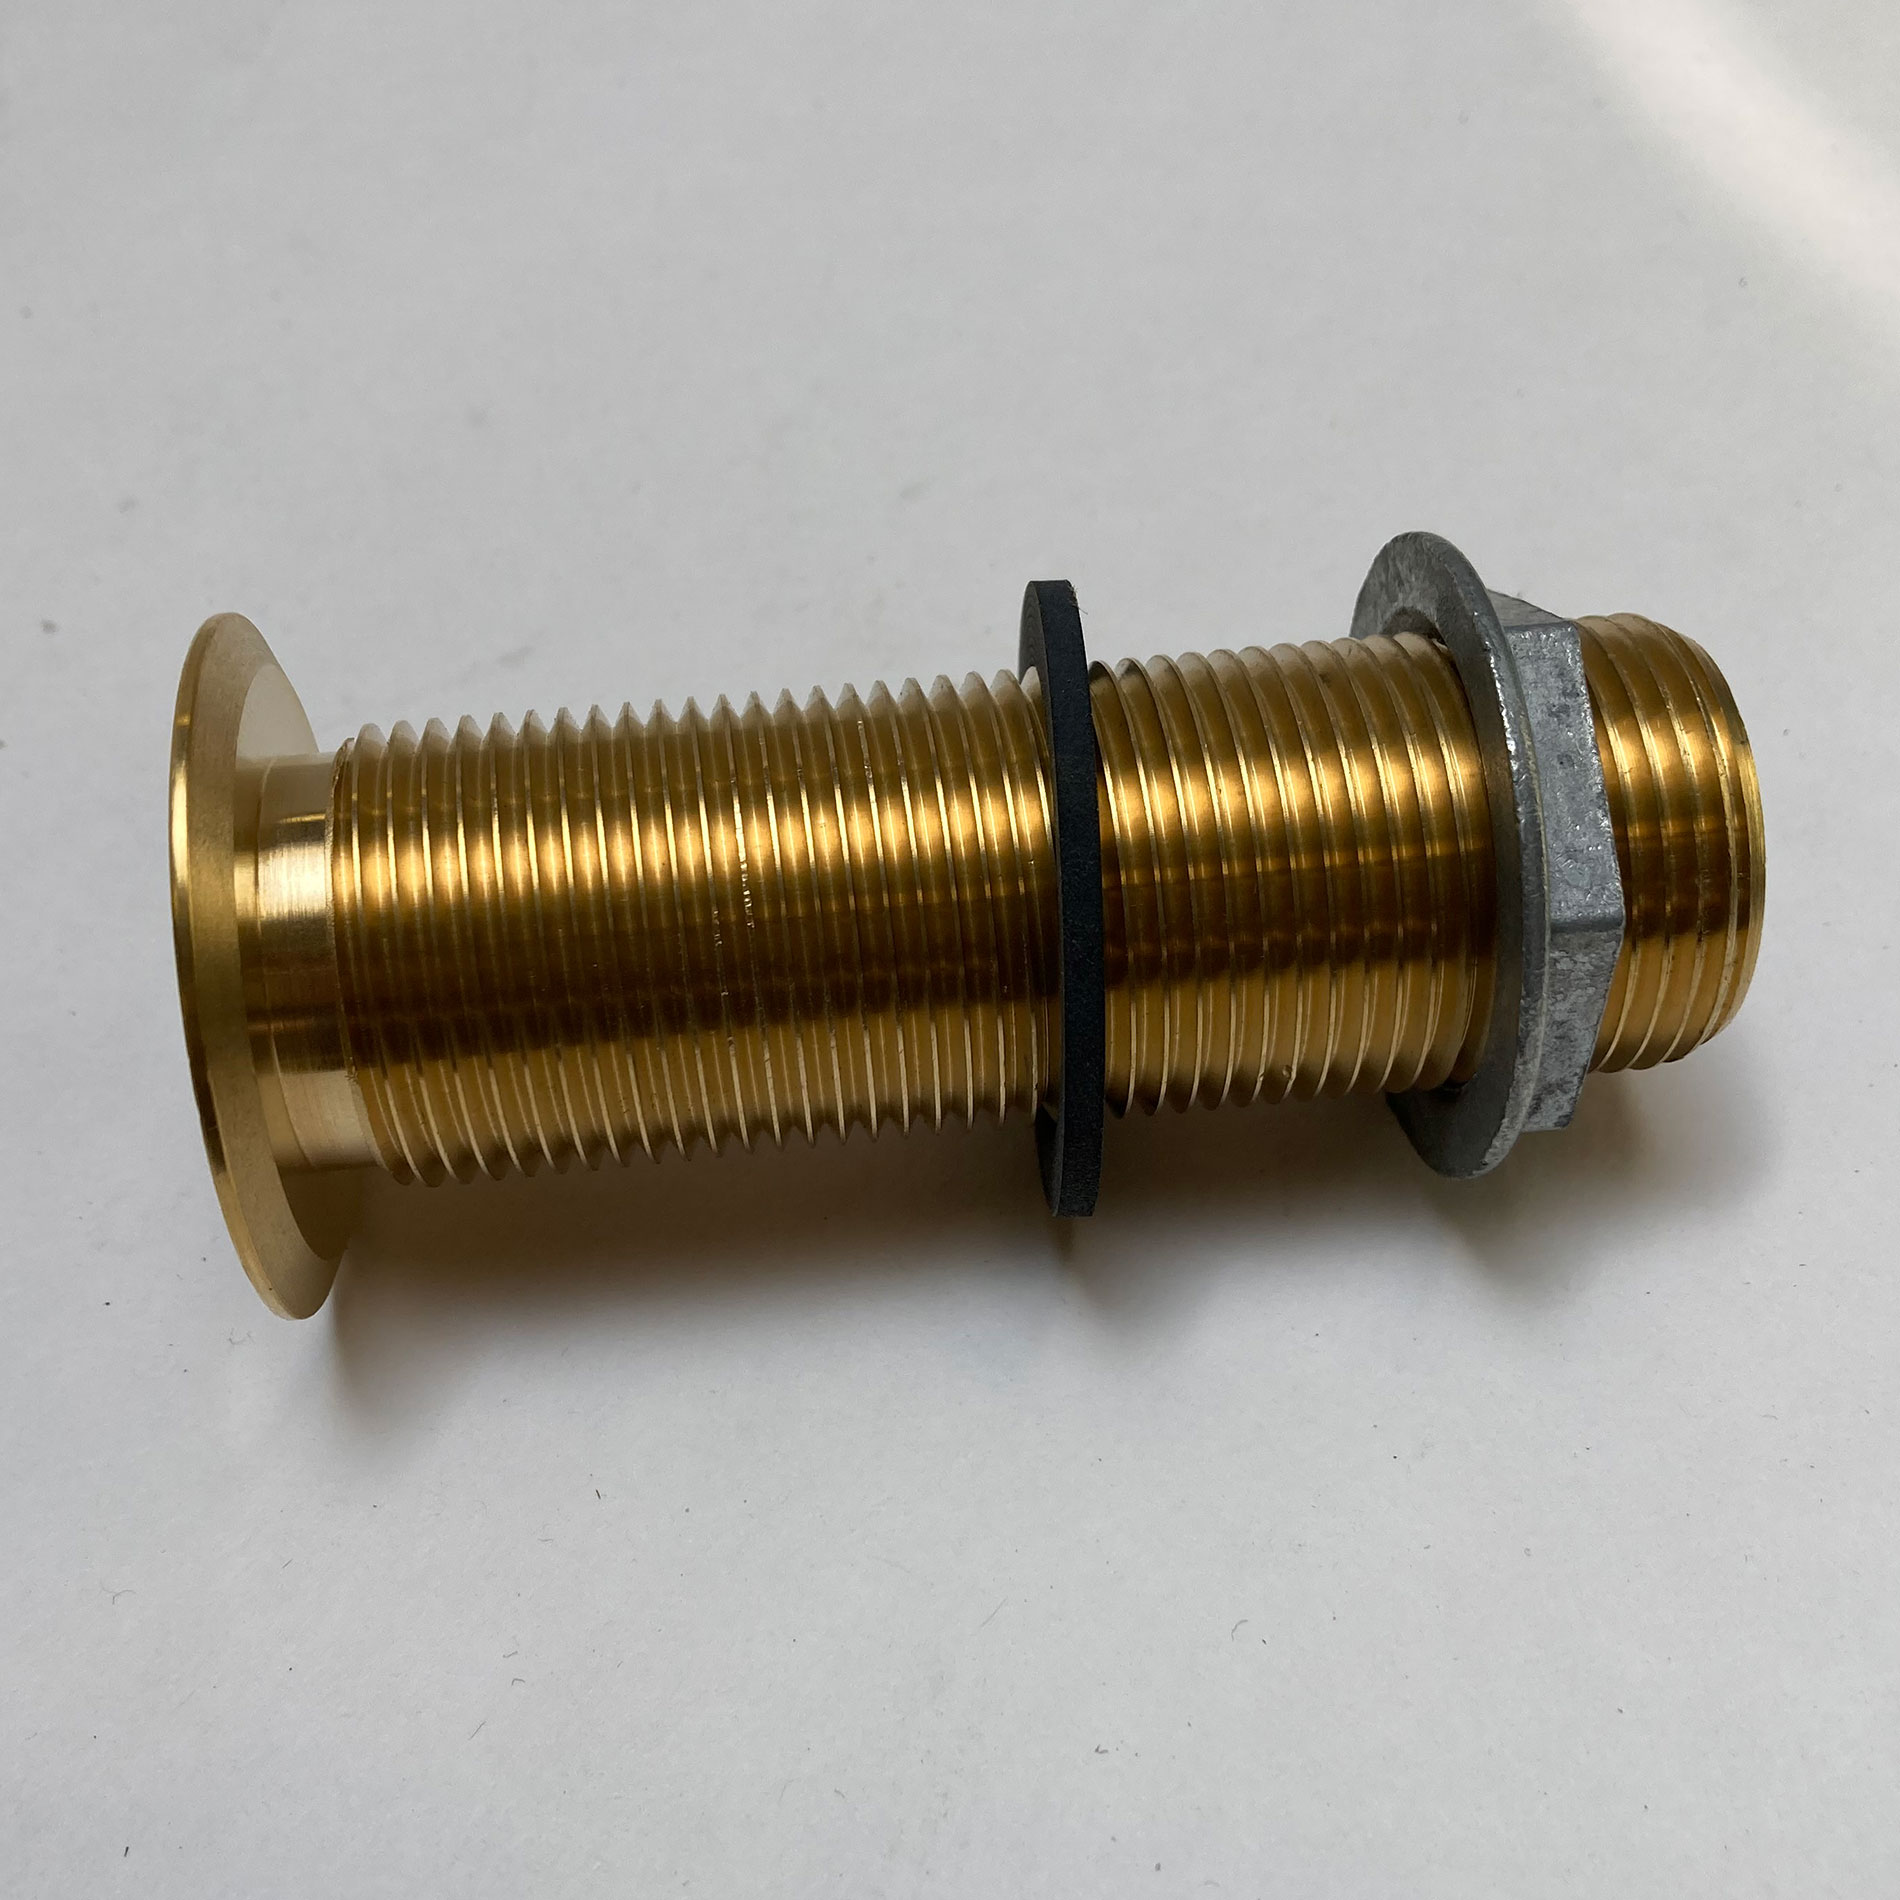 Brass Waste Drain with Locknut and Rubber Washer, #24-D-image